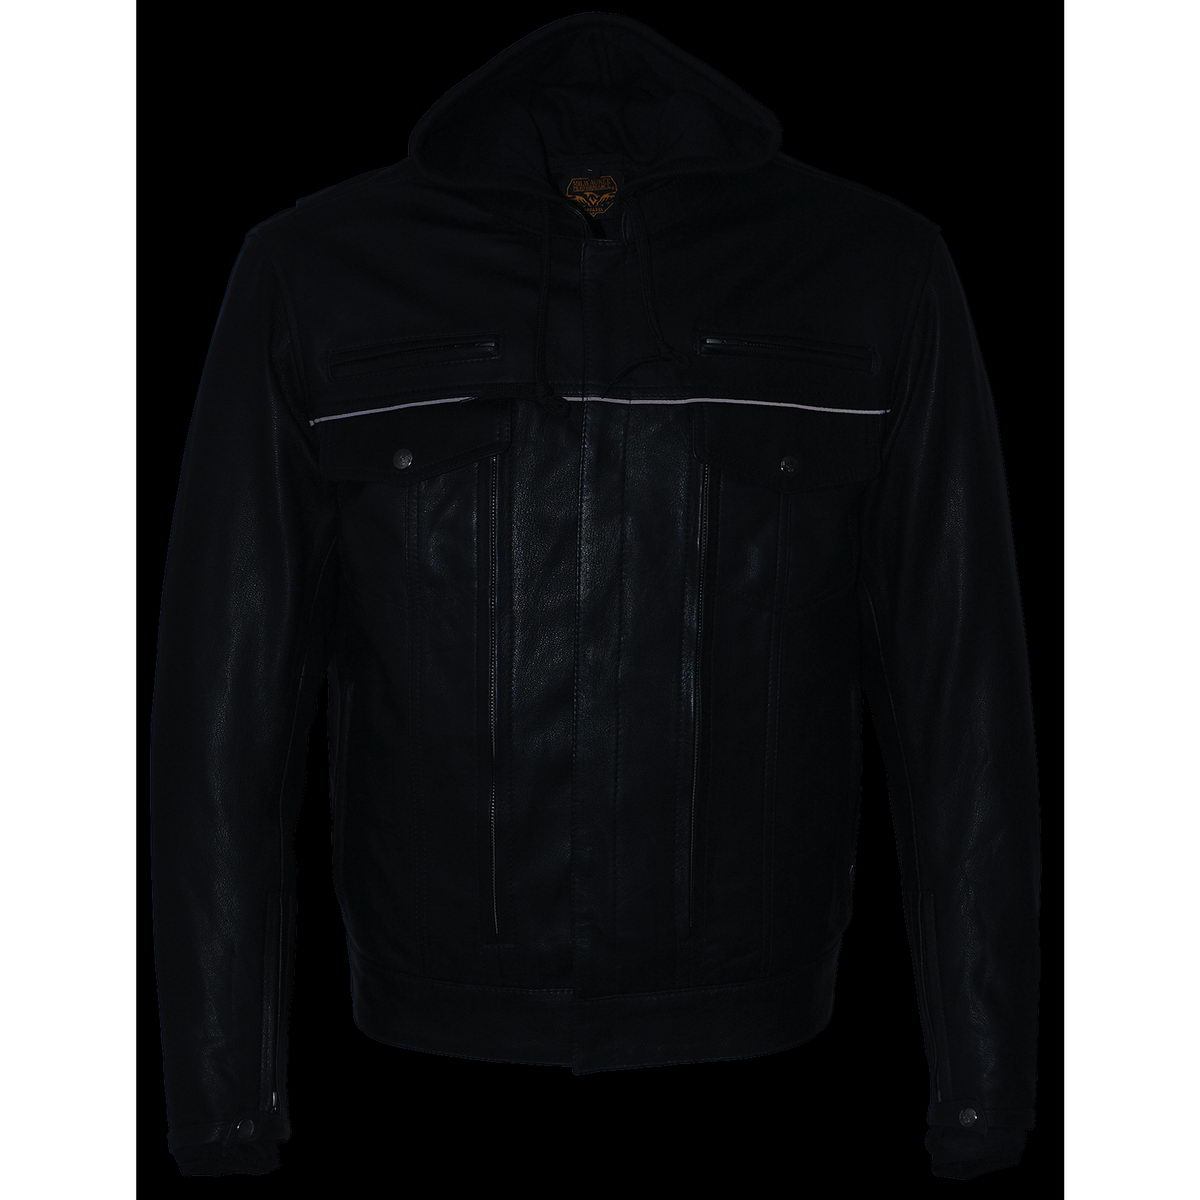 Milwaukee Leather MLM1537 Men's Black Leather ‘Utility Pocket’ Vented Jacket with Removable Hoodie